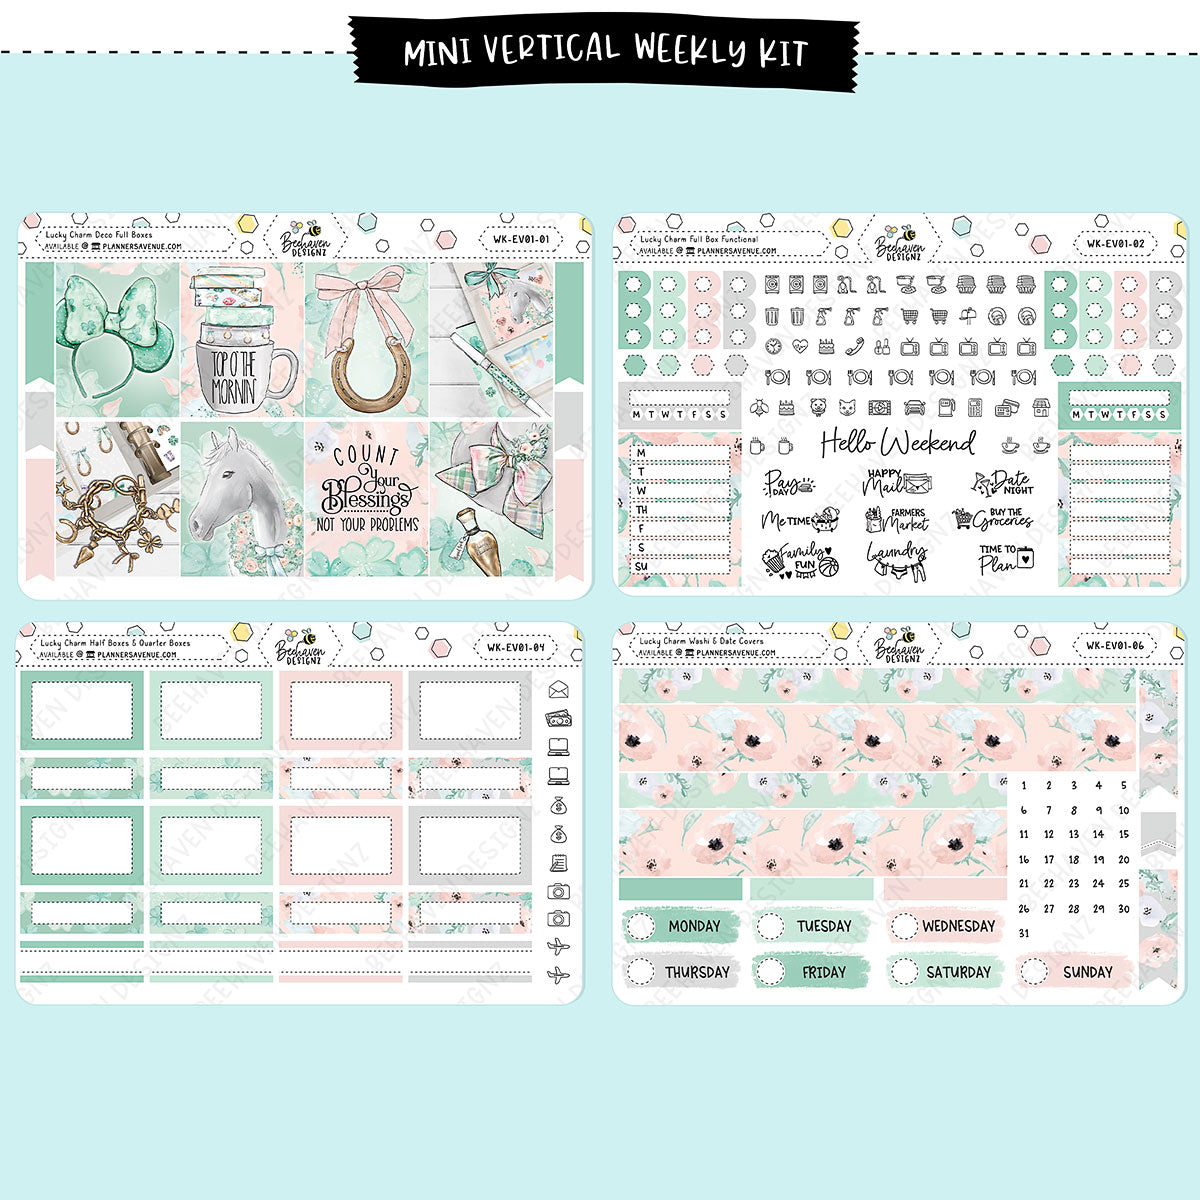 Lucky Charm Vertical Weekly Kit